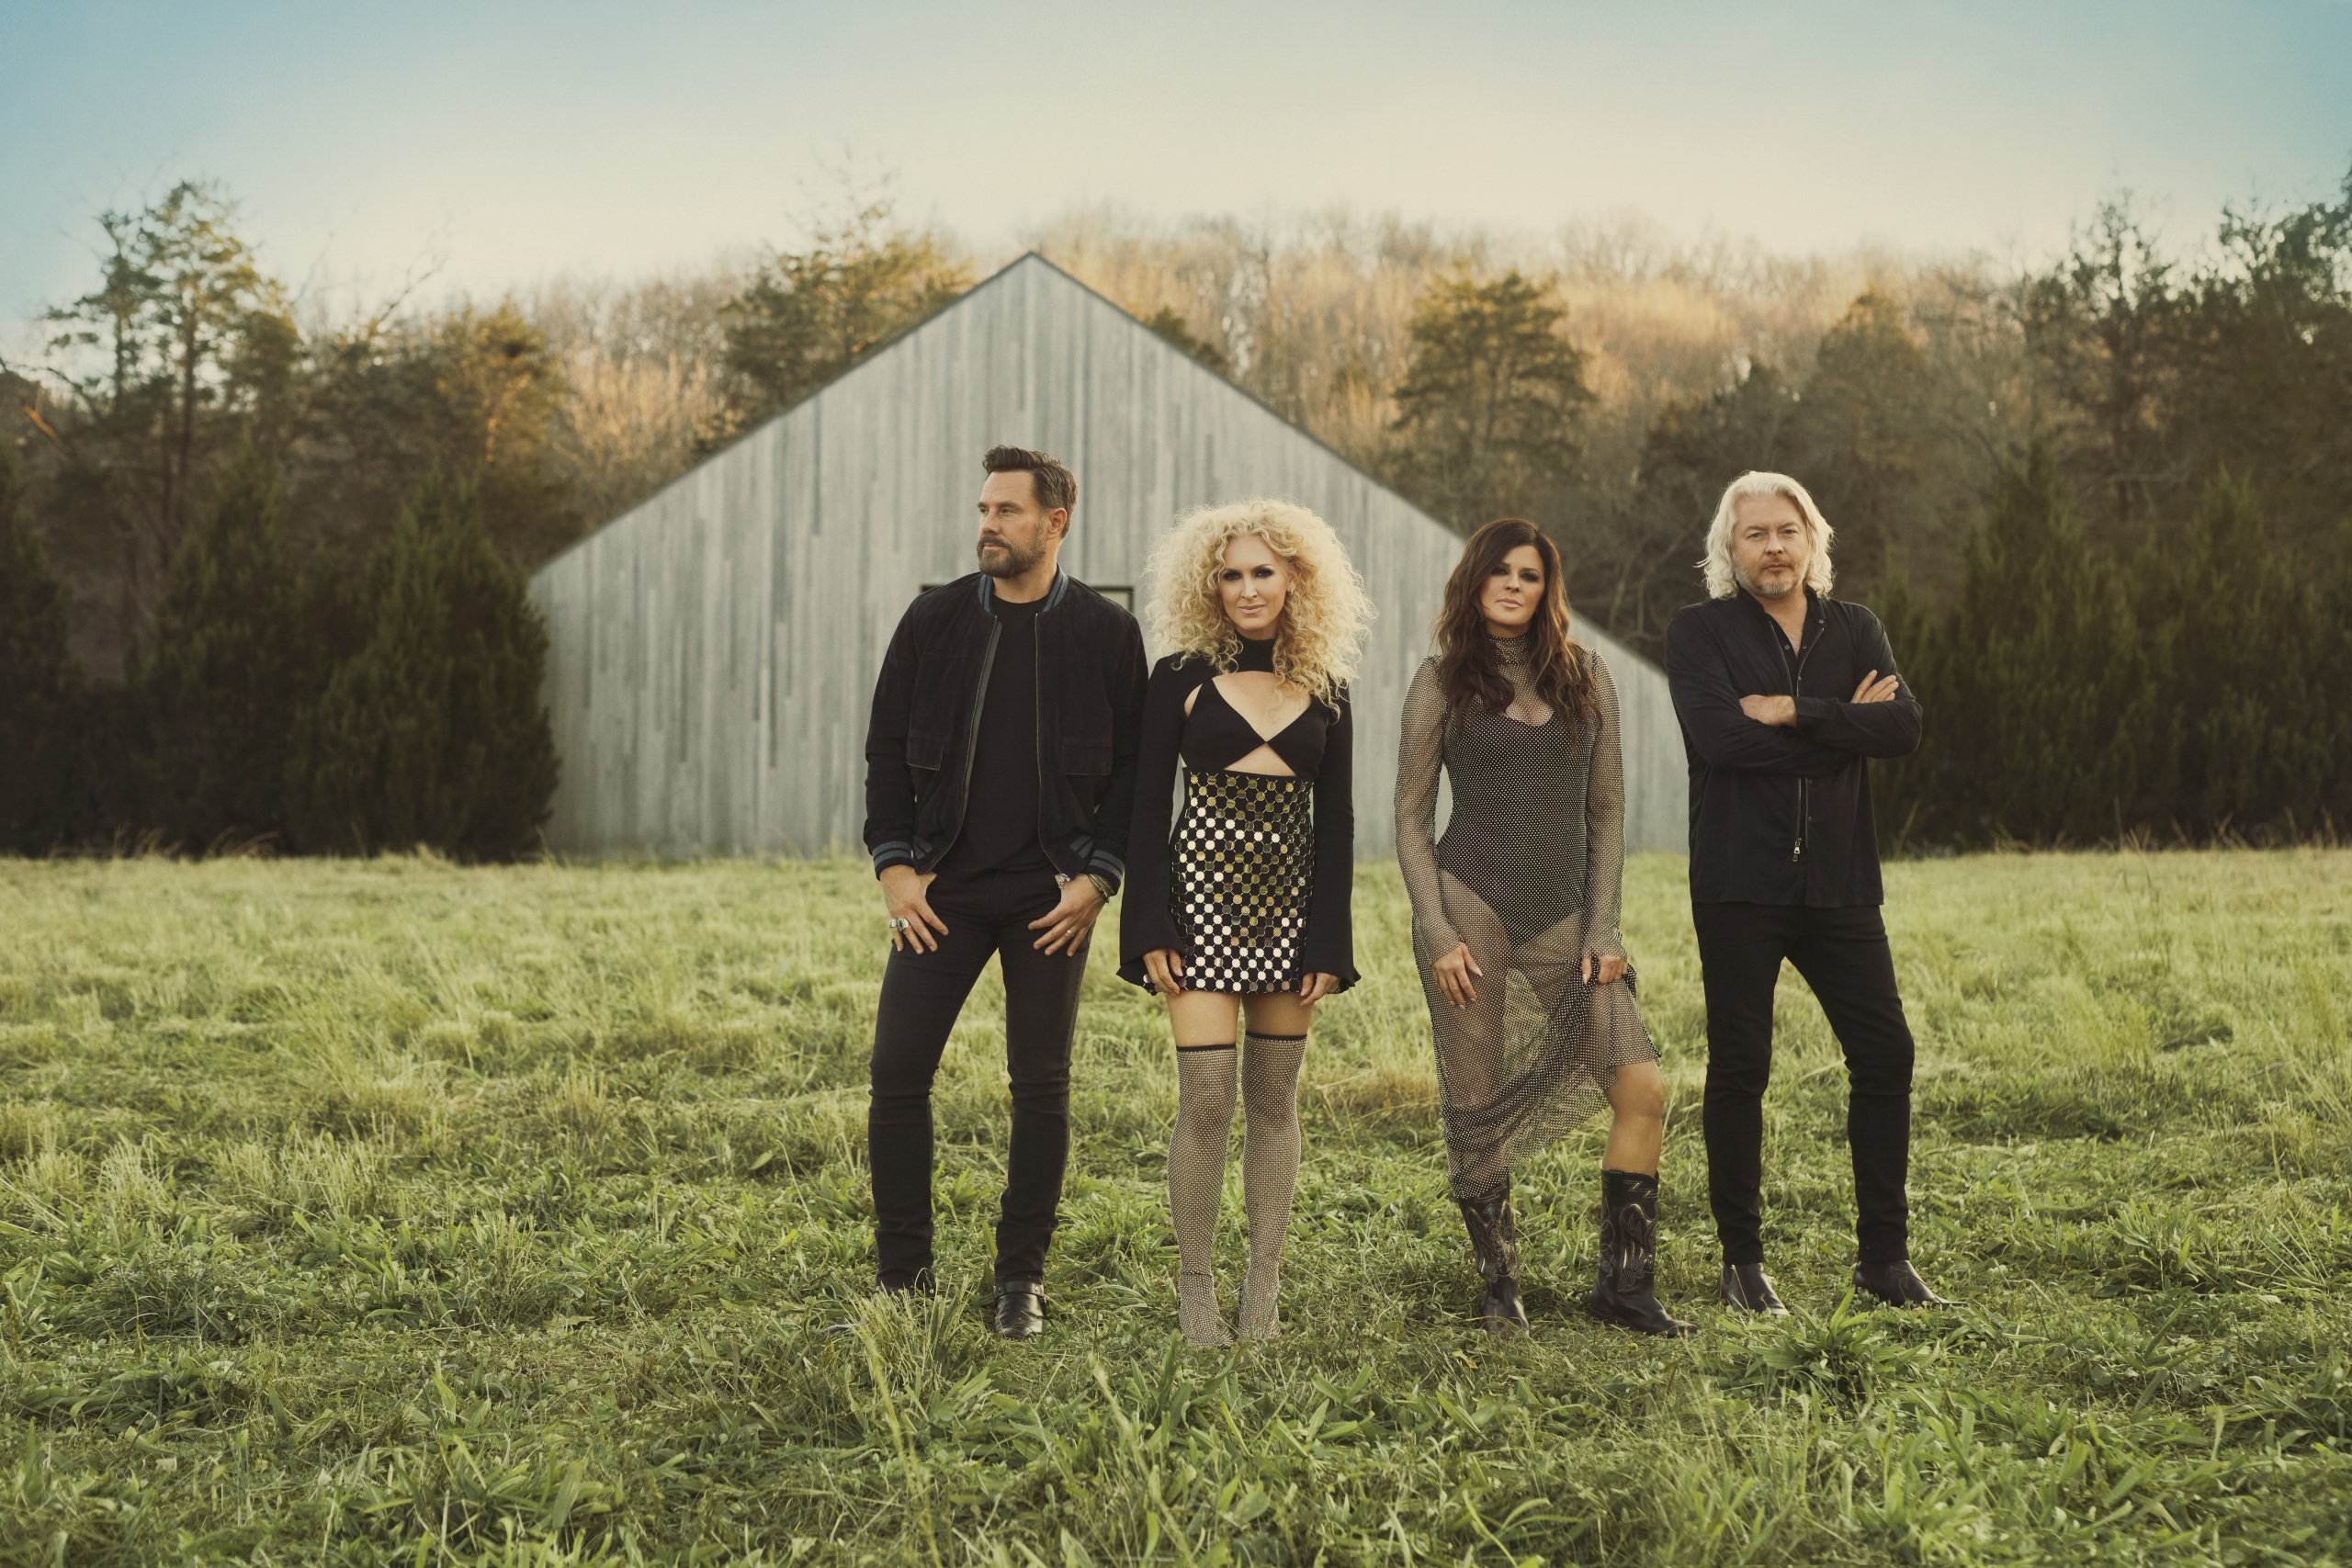 THE MEMBERS OF LITTLE BIG TOWN ARE EXCITED ABOUT HOSTING THE INAUGURAL PEOPLE’S CHOICE COUNTRY AWARDS.